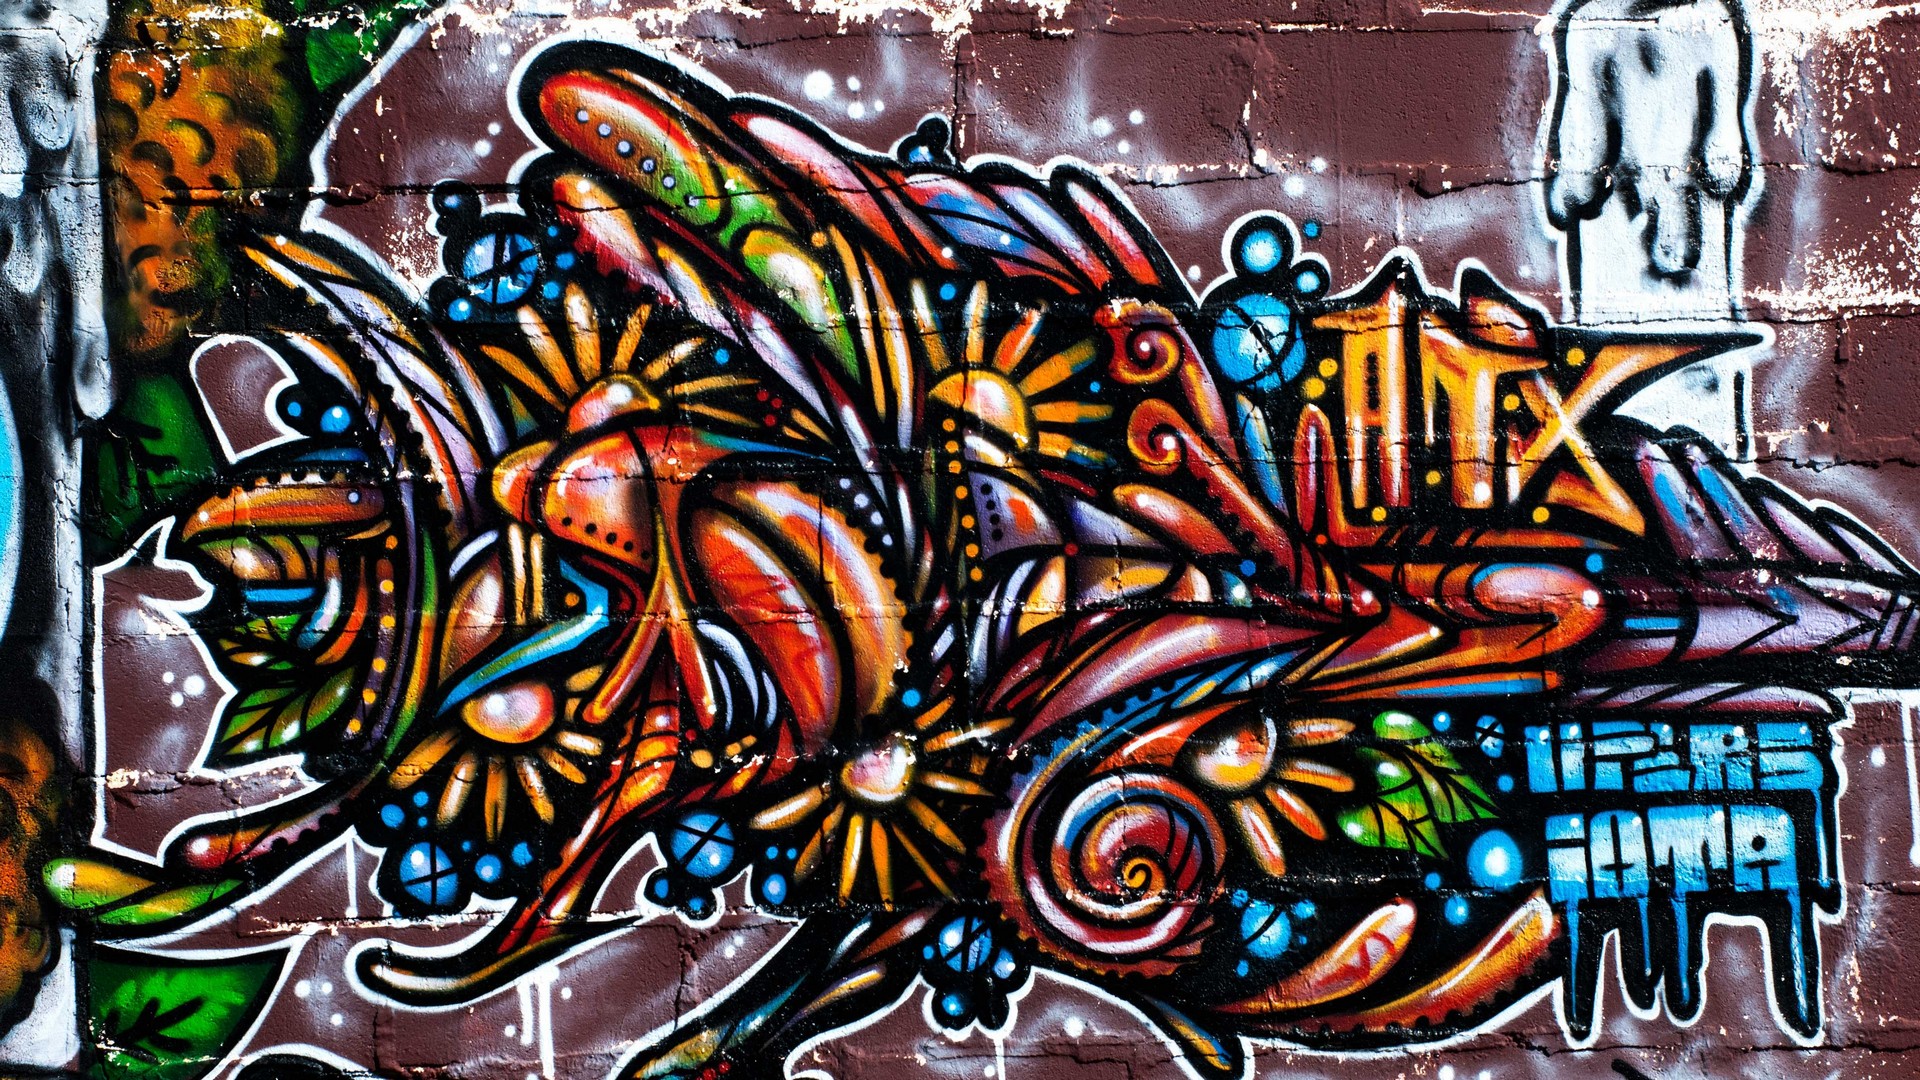 Best Street Art Wallpaper with image resolution 1920x1080 pixel. You can use this wallpaper as background for your desktop Computer Screensavers, Android or iPhone smartphones